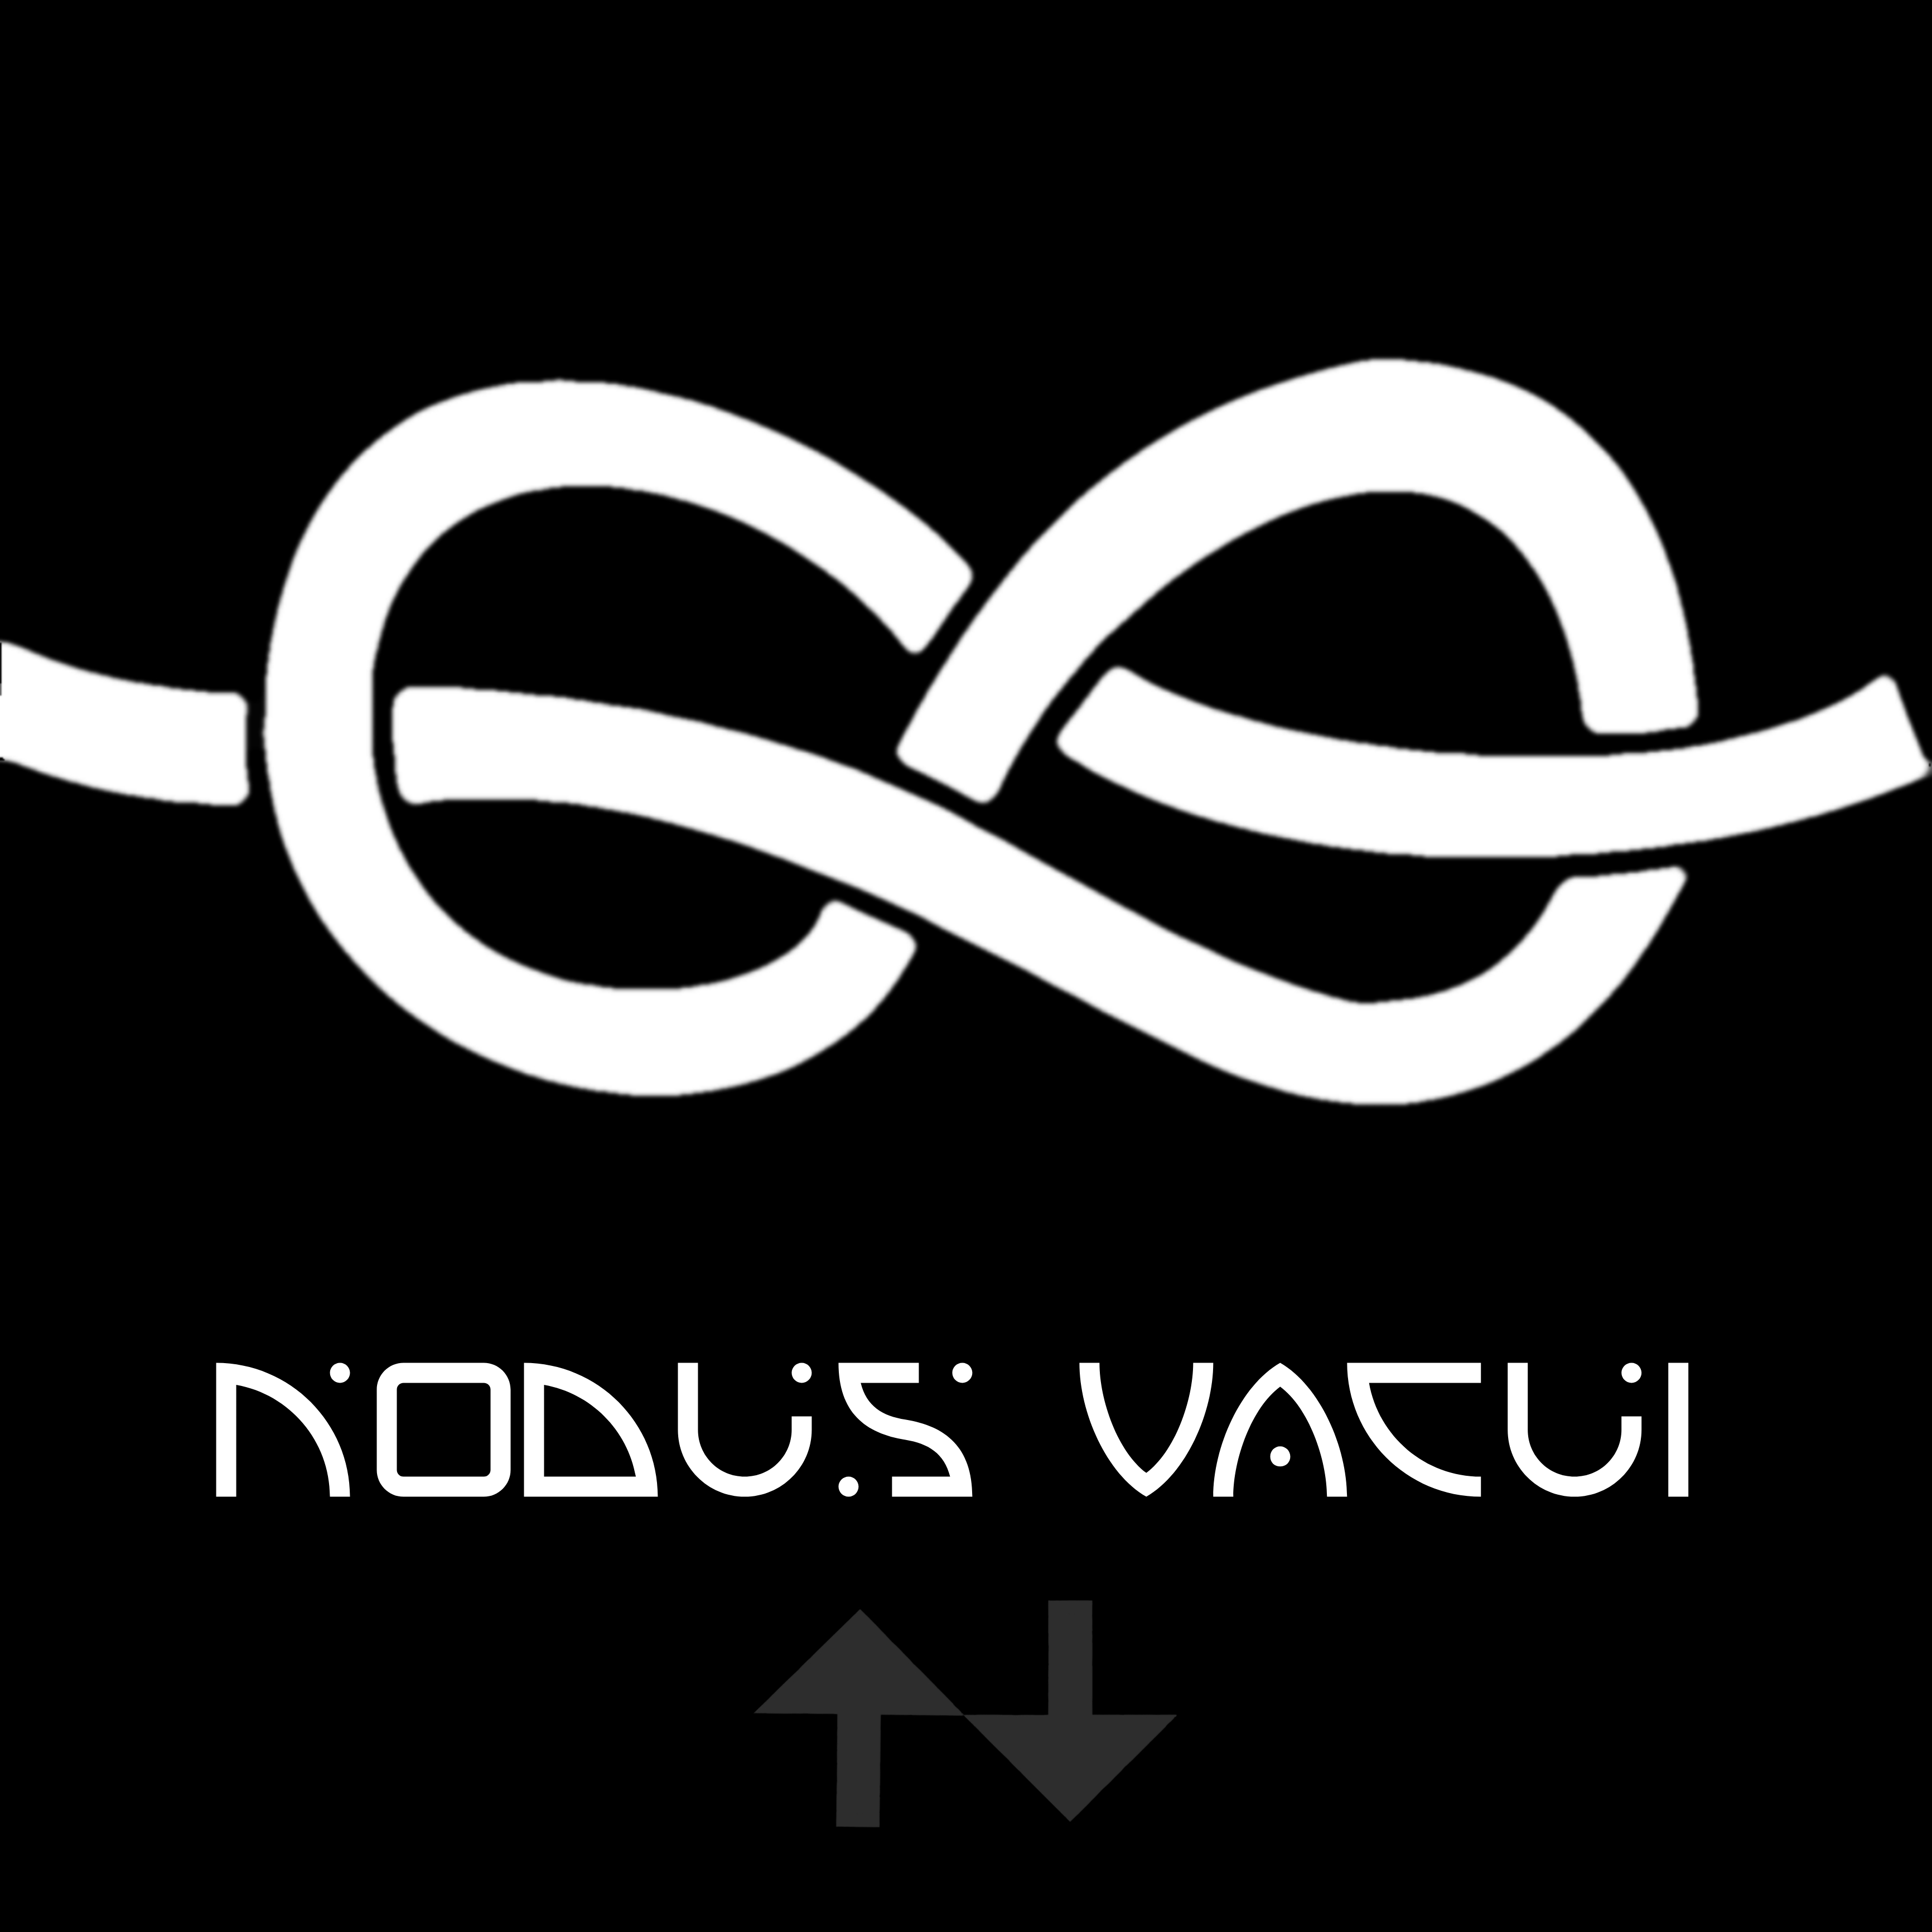 <b>Nodus Vacui - Void knot</b><br/><br/>Nodus Vacui is latin and stands for 